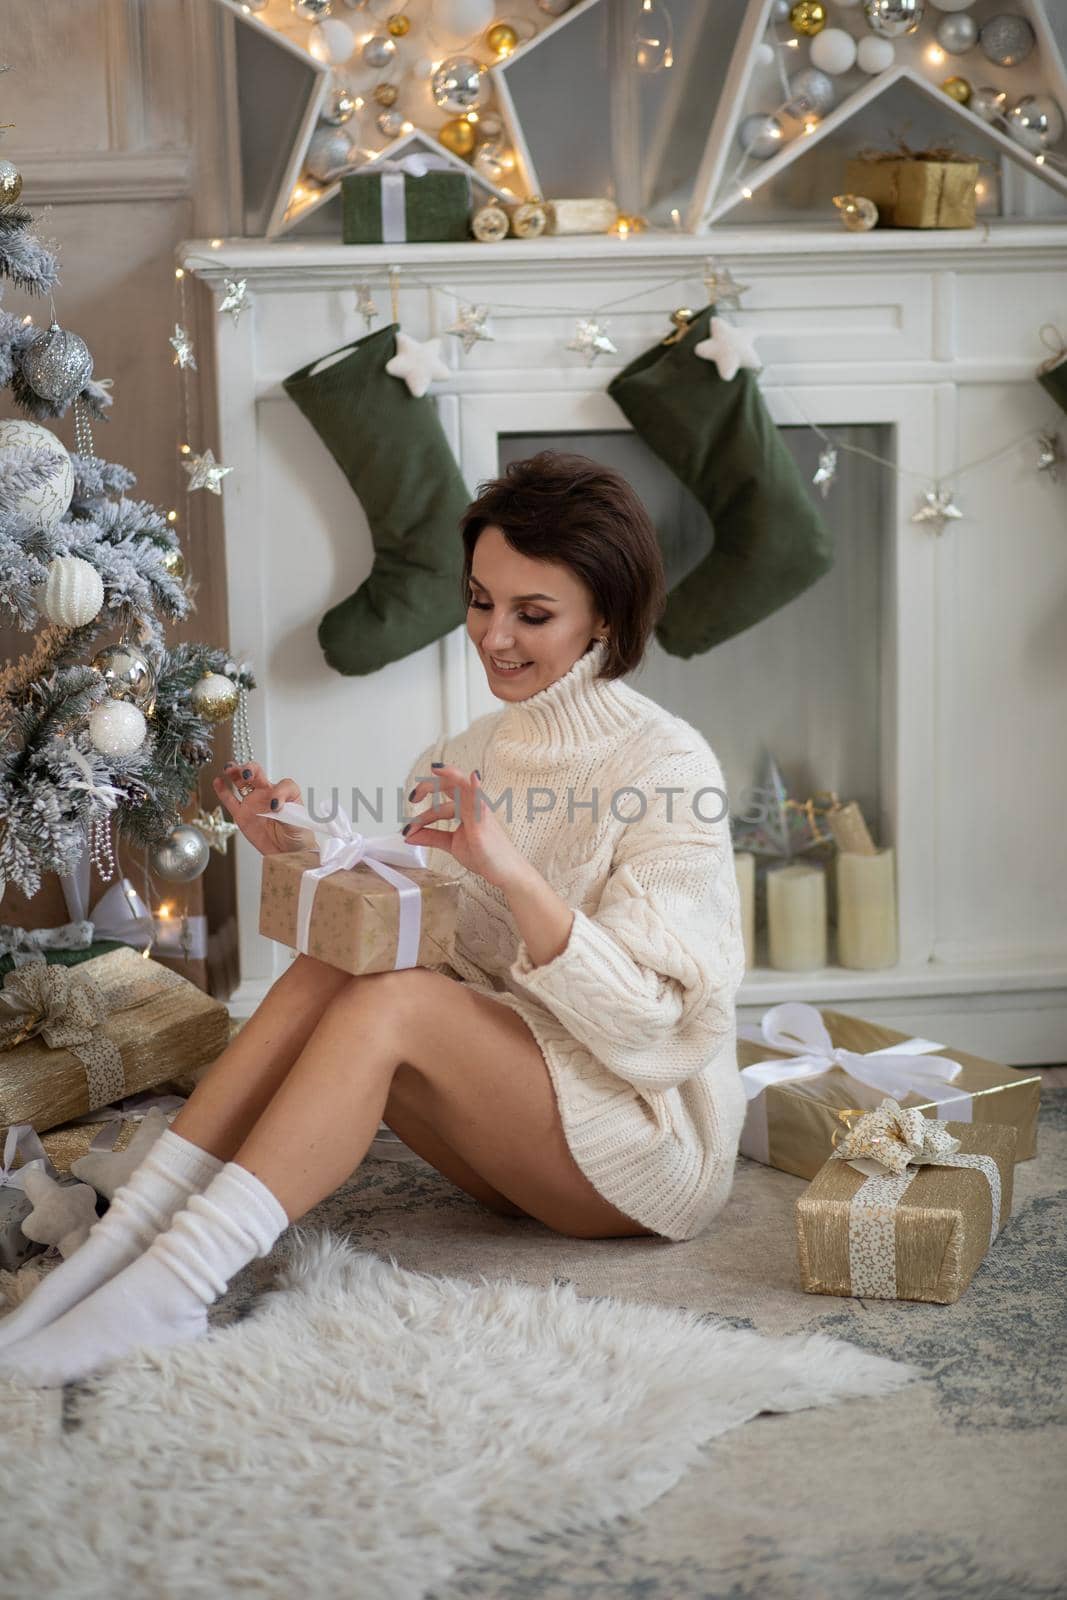 Portrait of a pretty adult woman in white knitted sweater opening Christmas gift sitting on floor.